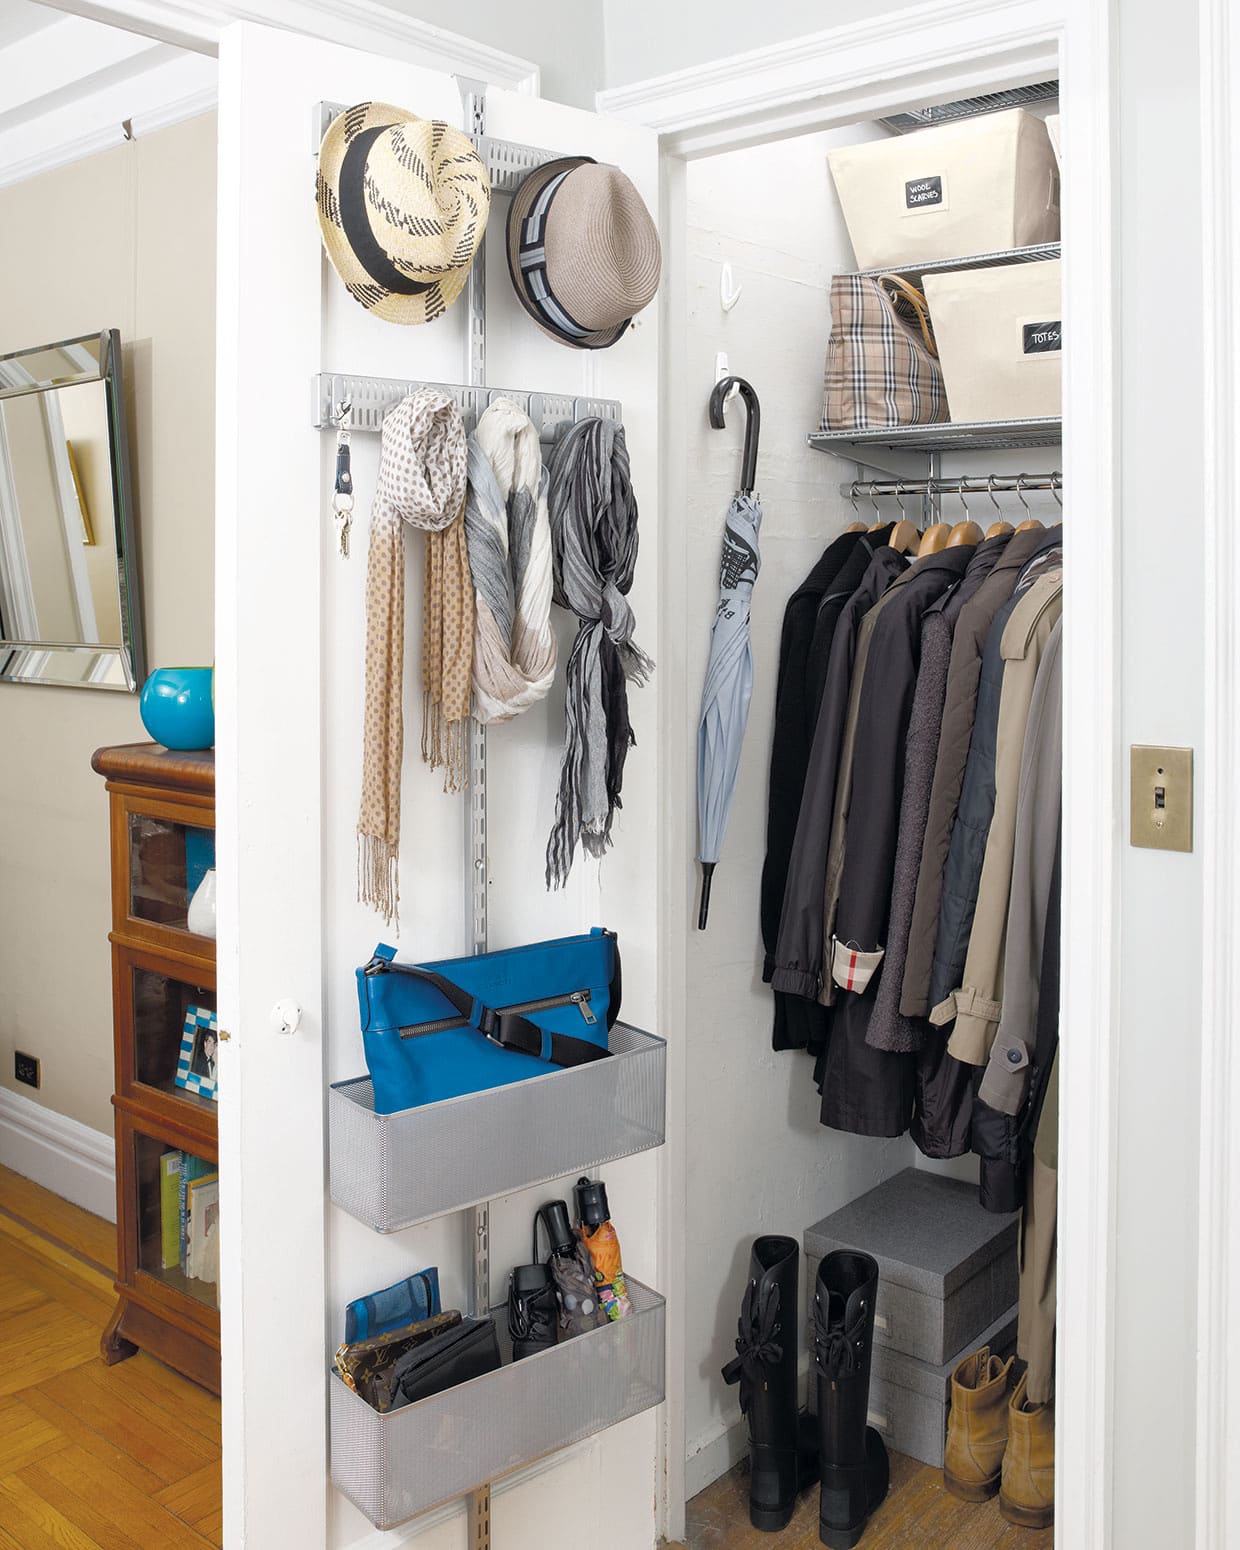 20 fascinating over the door storage ideas to put in your bag - 149